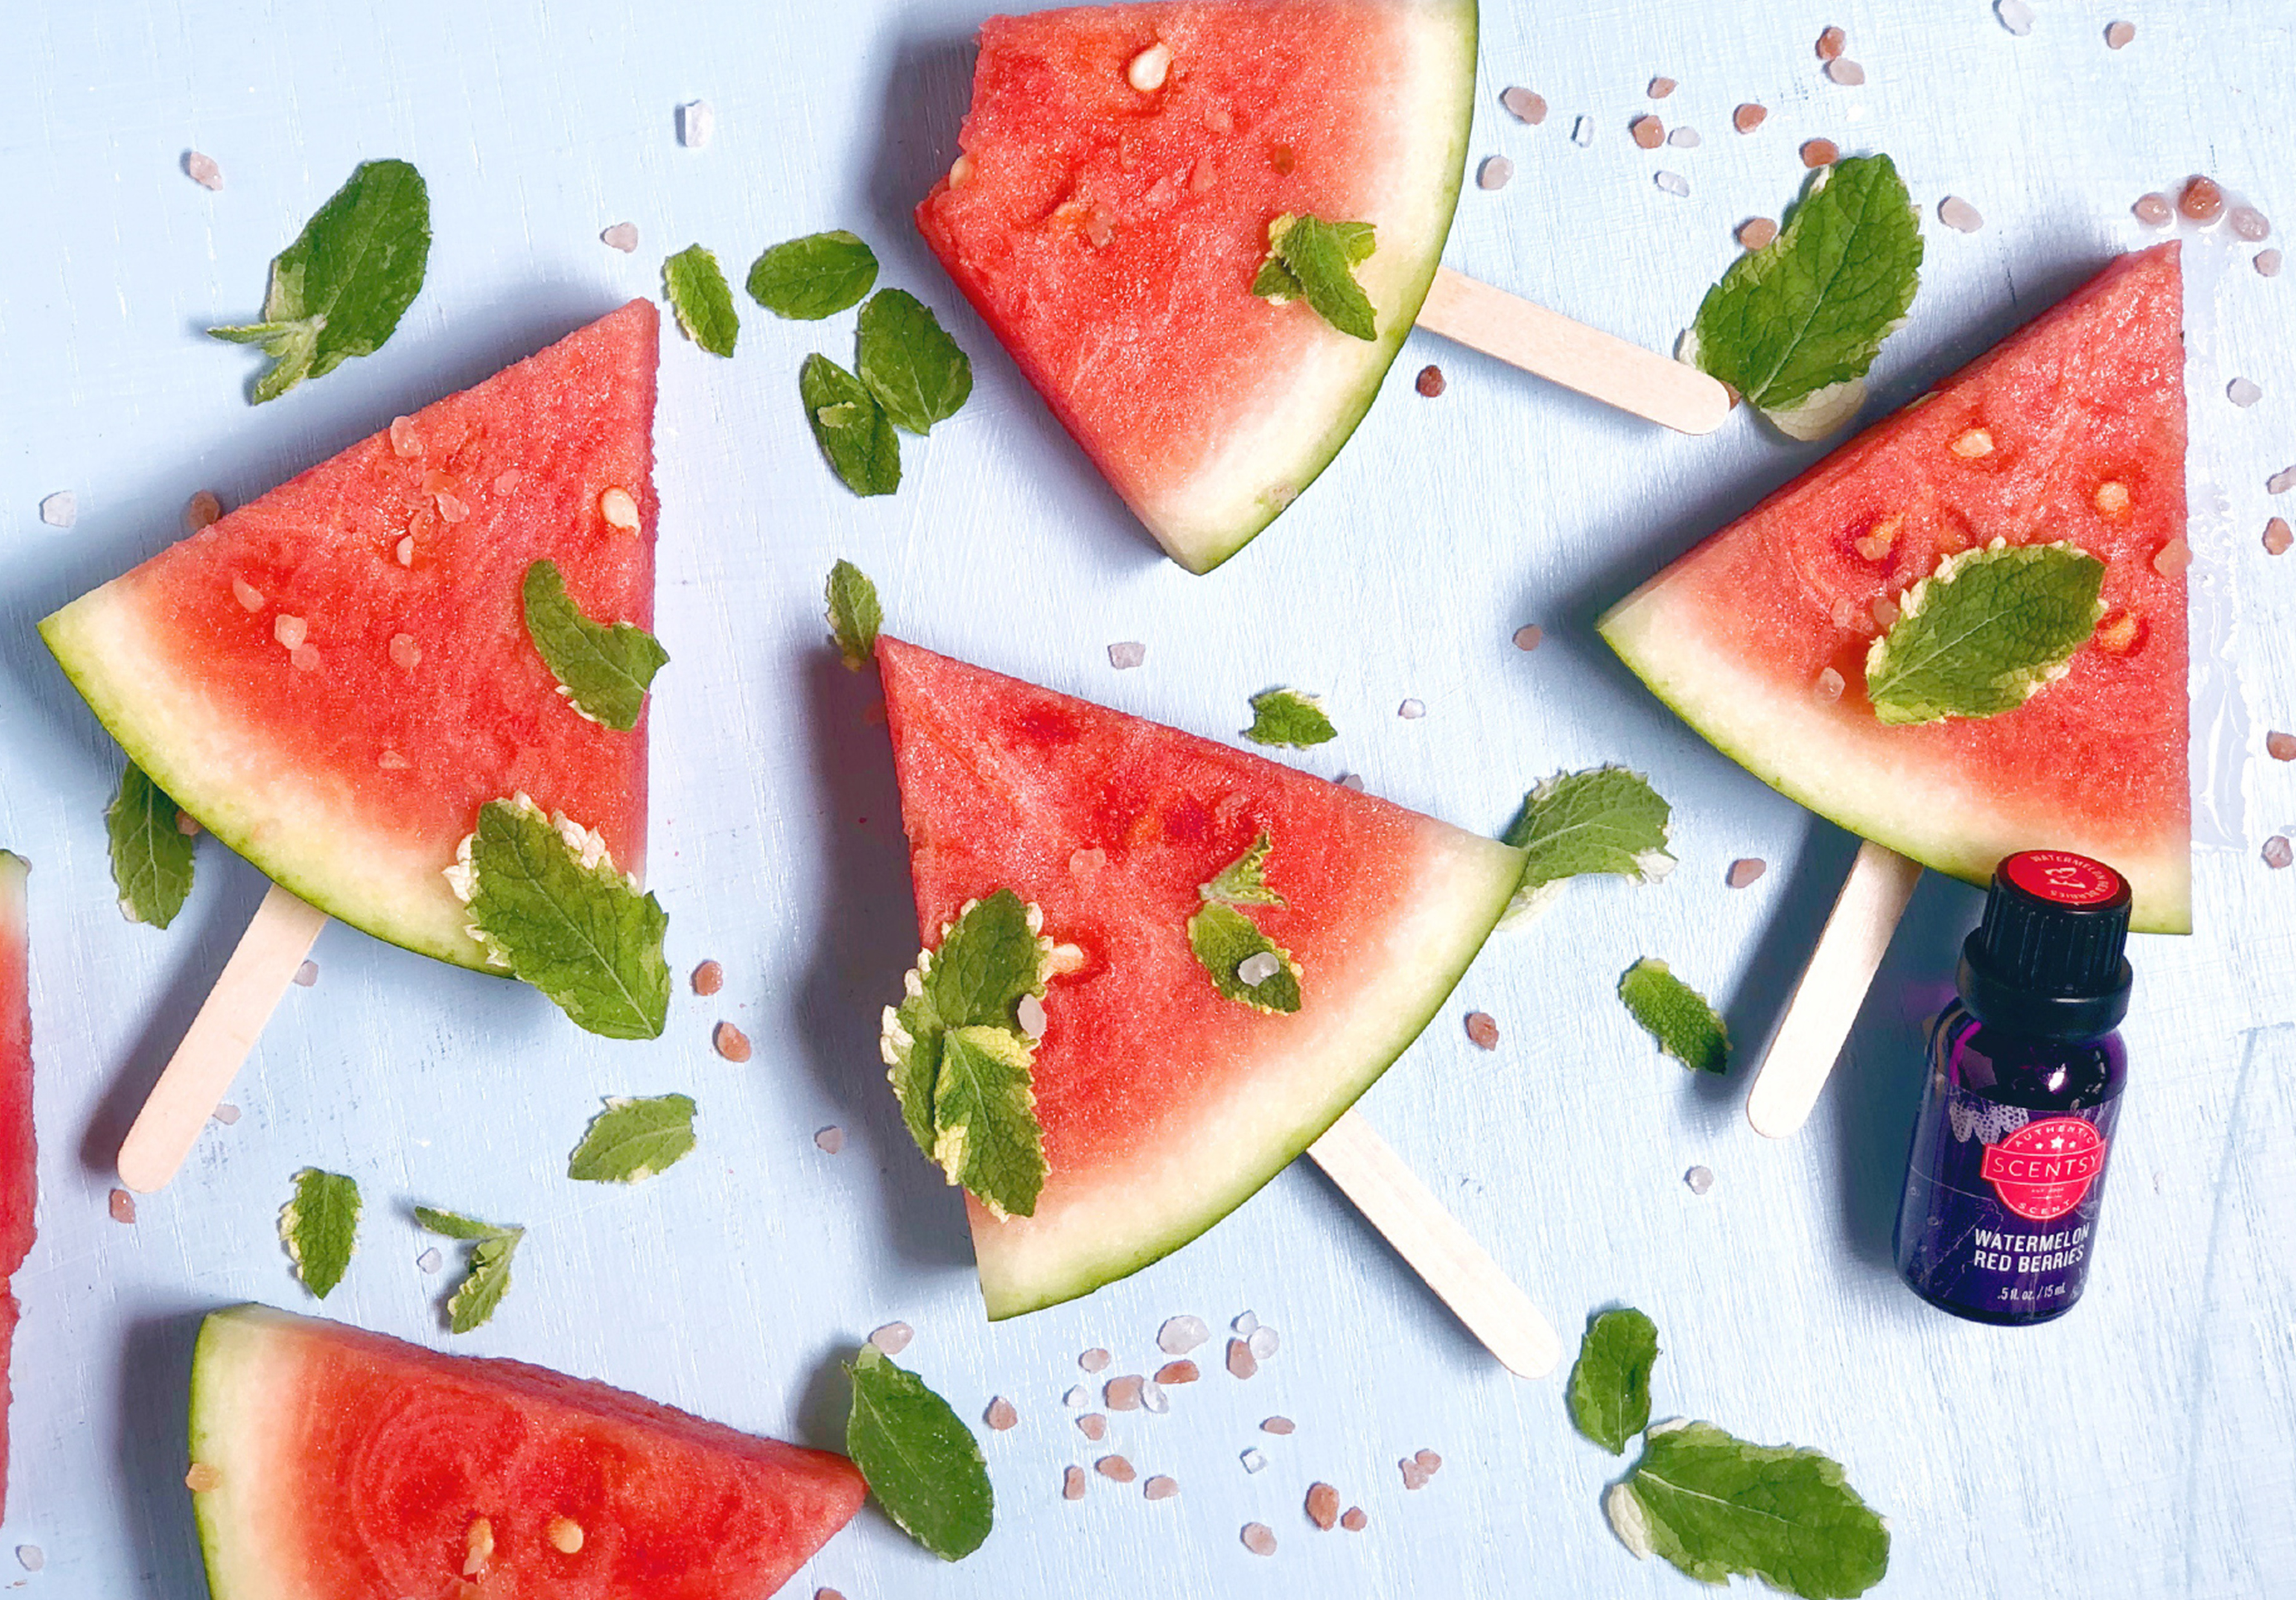 August 1st blog header photoshoot - Watermelon with leaves and rock salt featuring Watermelon red berries diffuser oil